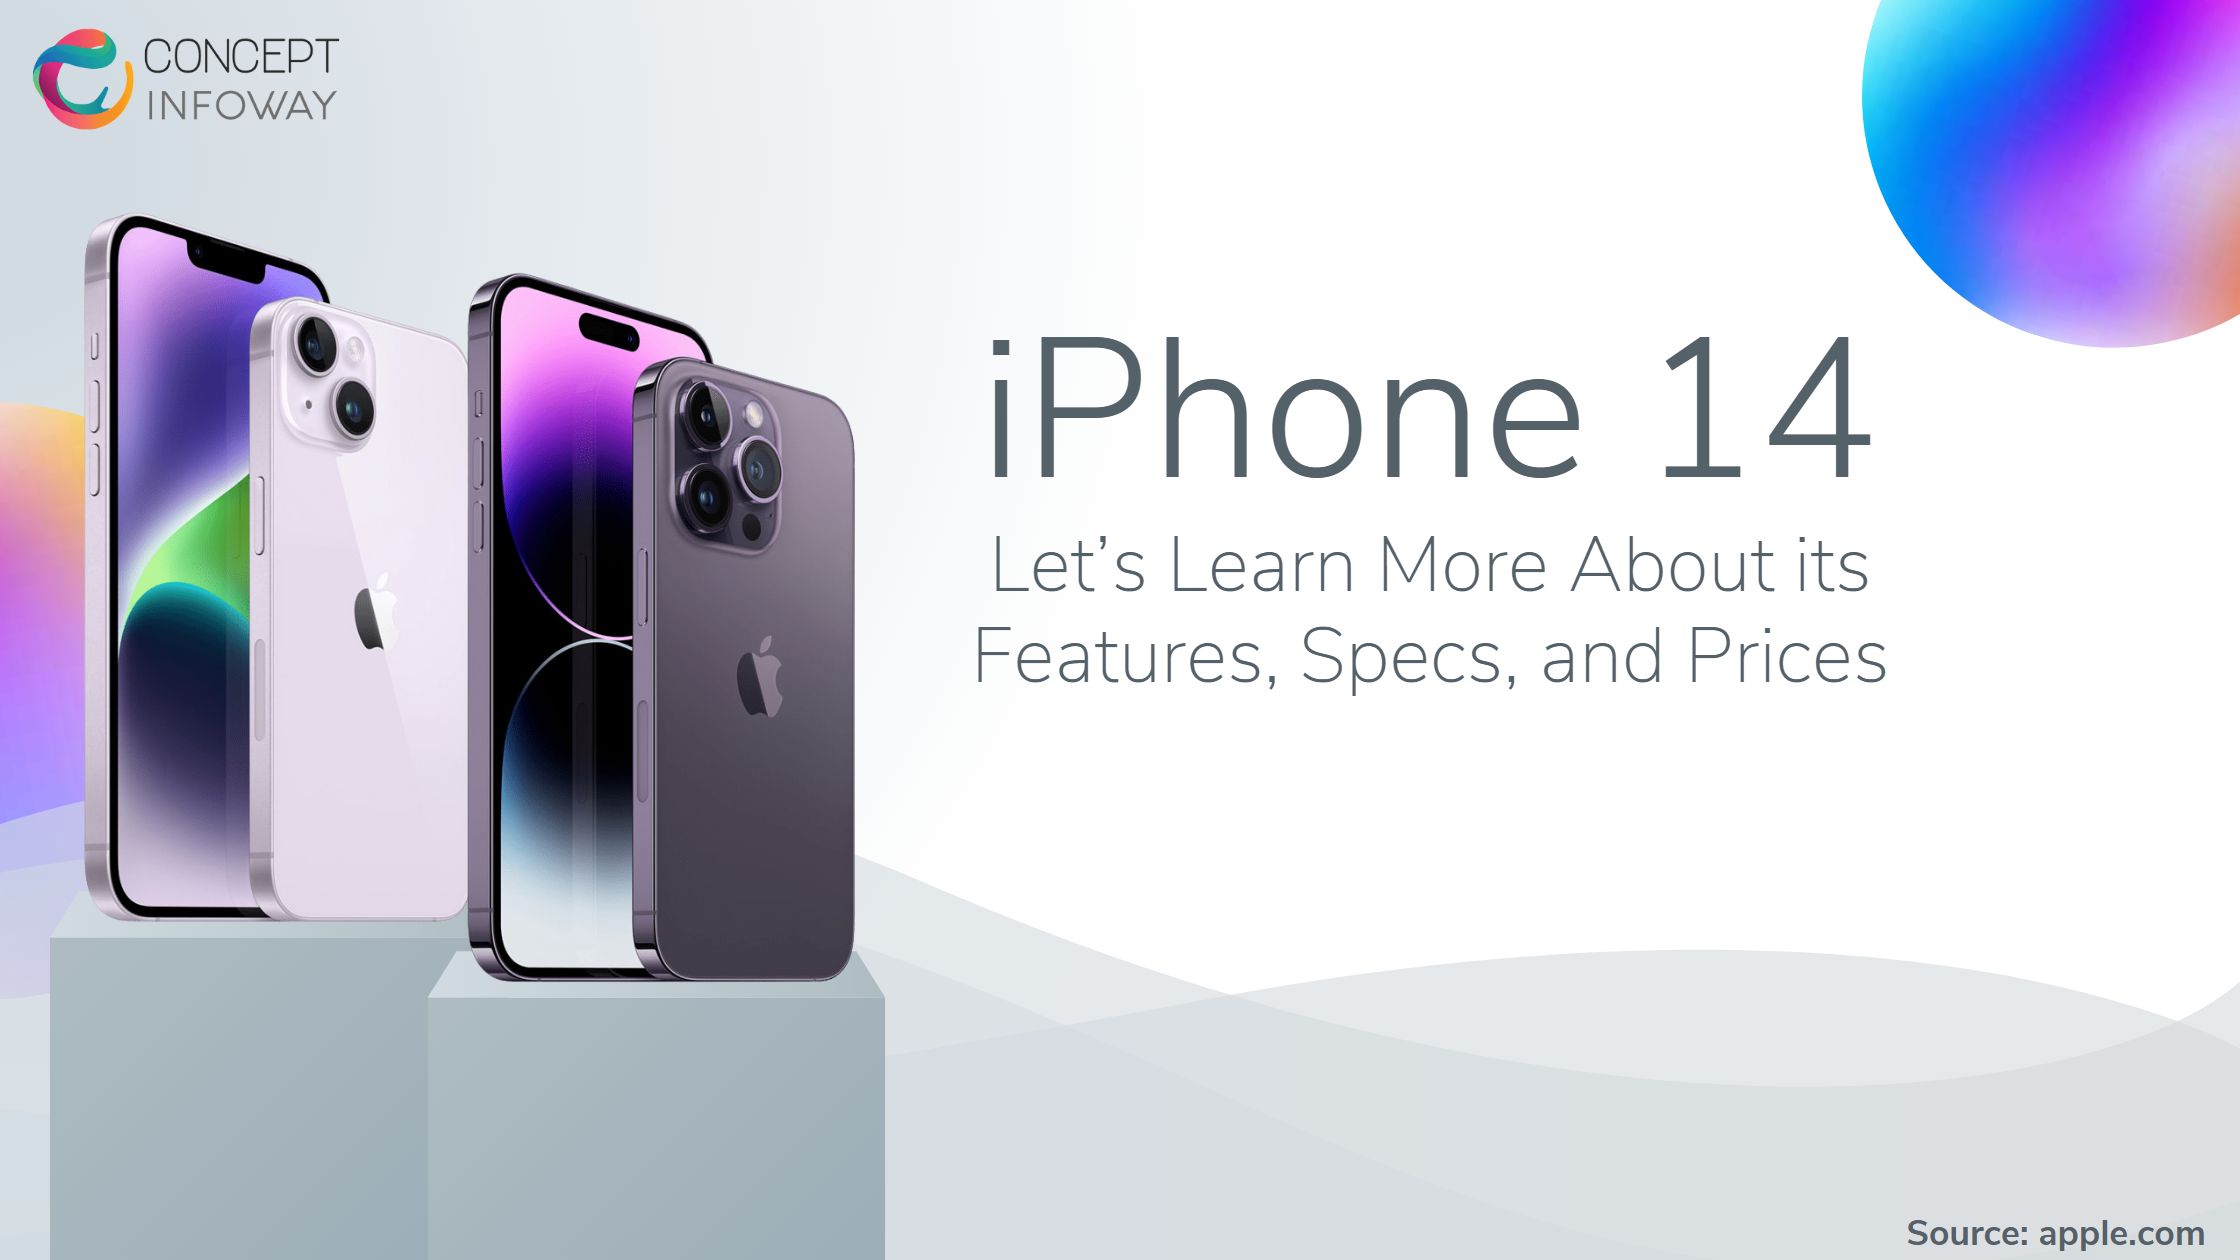 iPhone 14 and iPhone 14 Pro – Let’s Learn More About its Features, Specs, and Prices